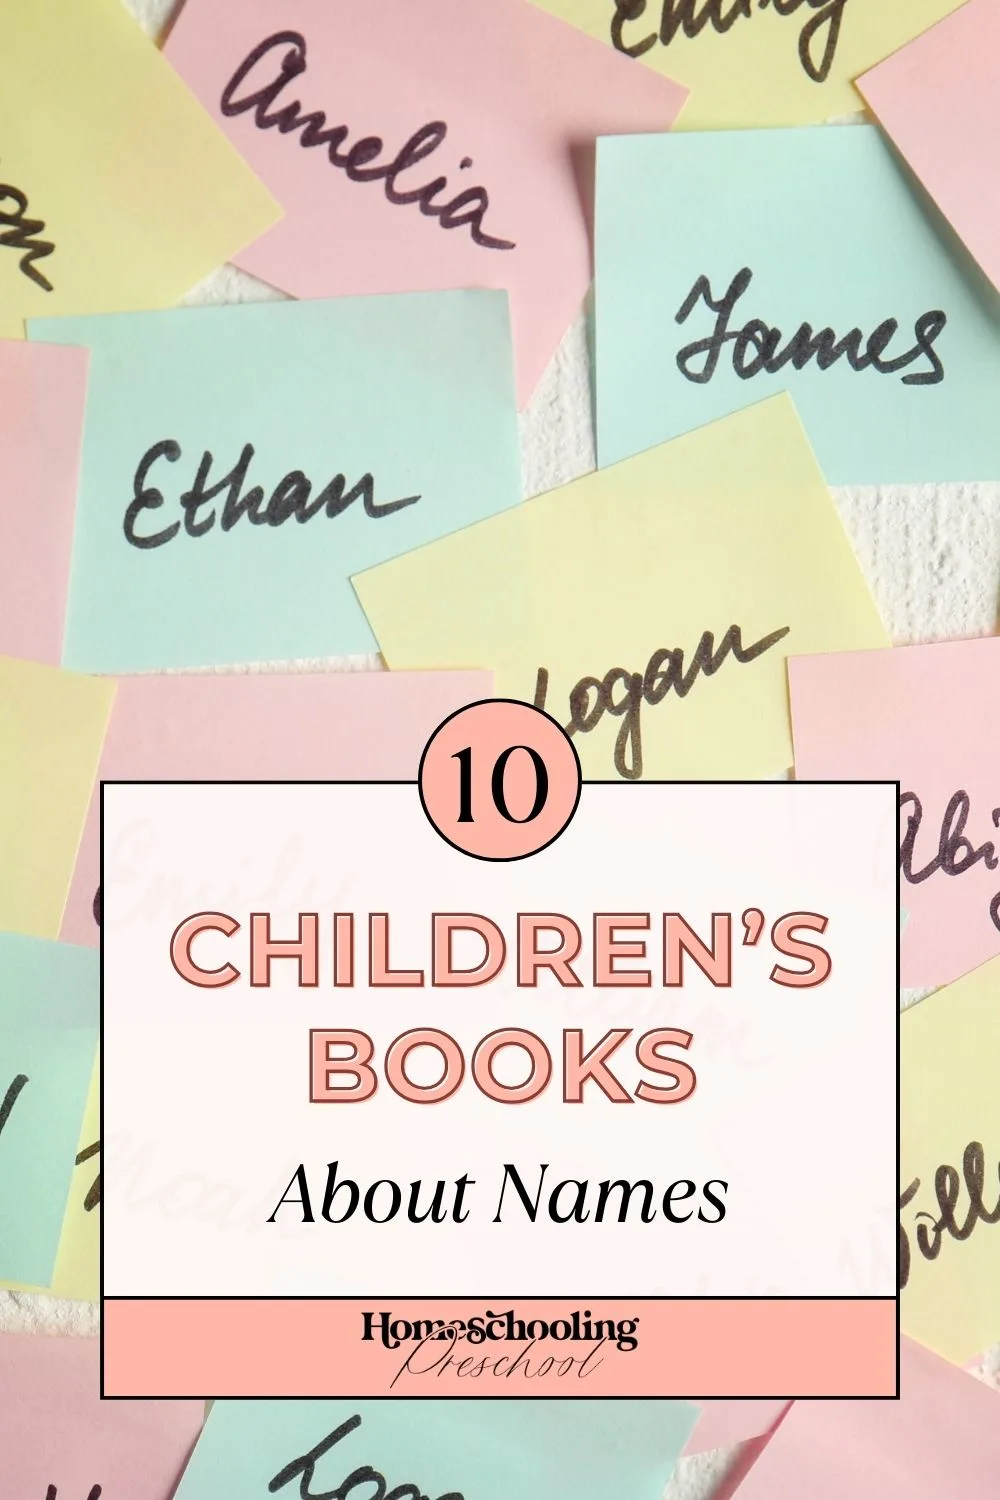 10 Children's Books About Names